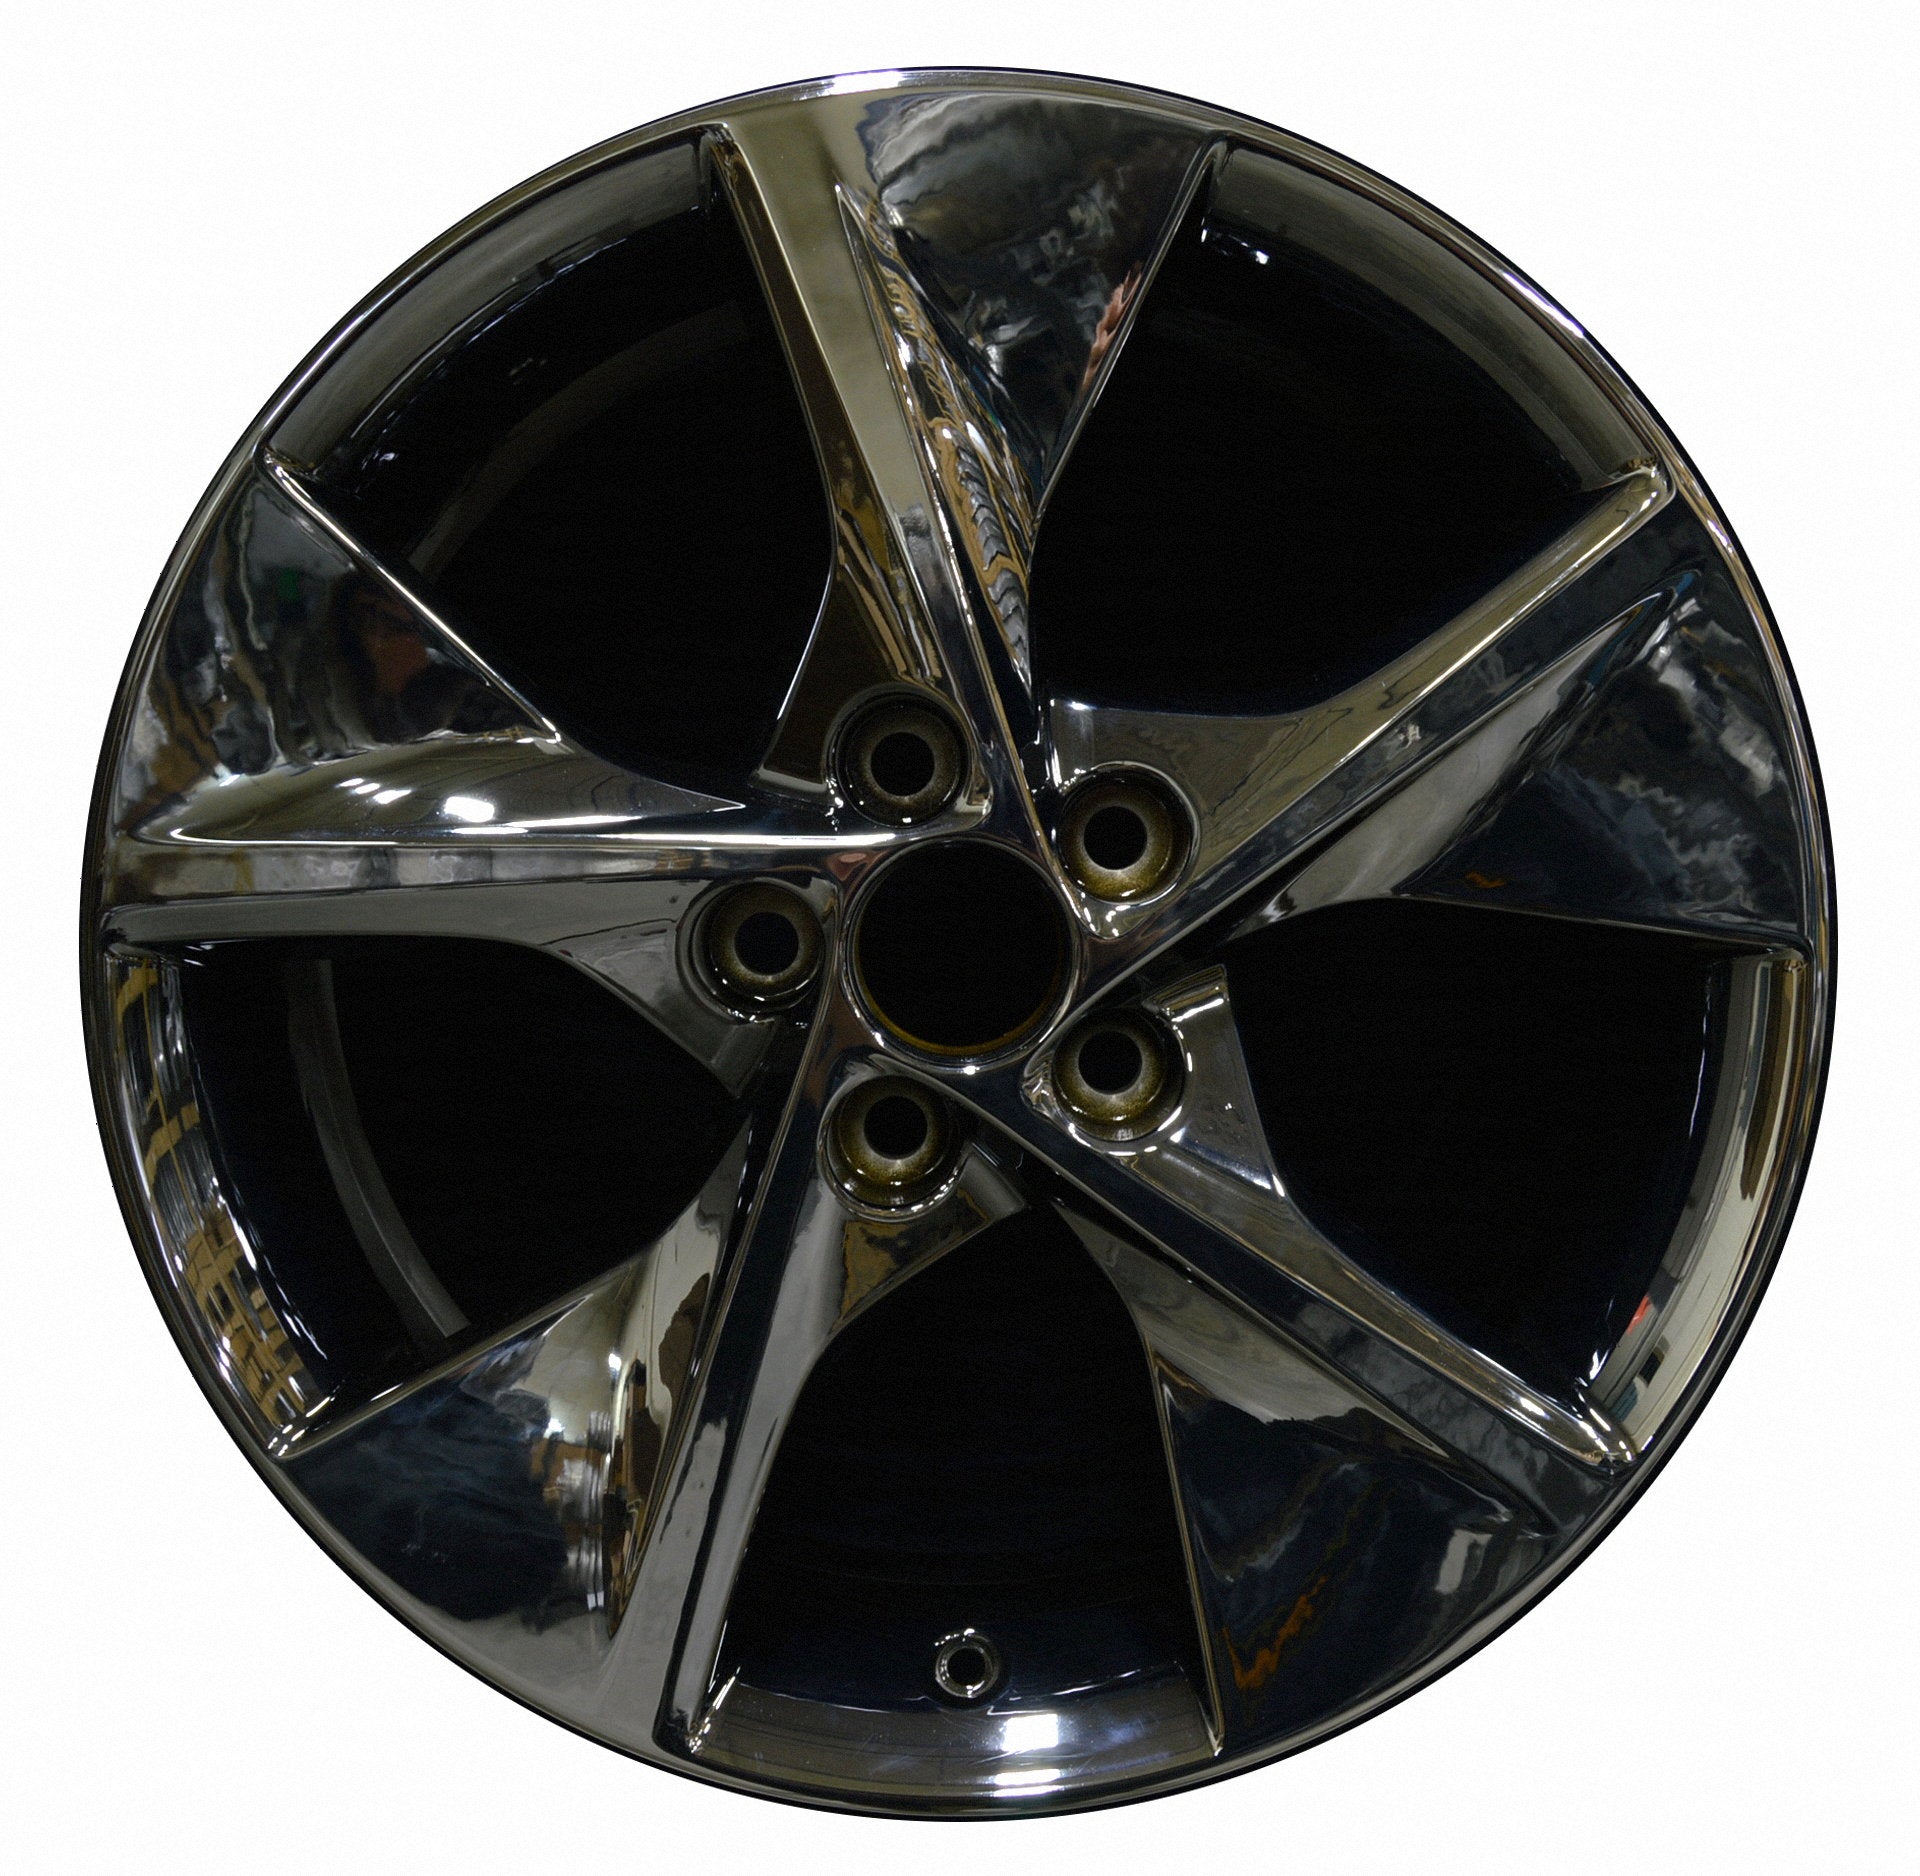 Toyota Camry  2007, 2008, 2009, 2010, 2011, 2012, 2013, 2014 Factory OEM Car Wheel Size 18x7.5 Alloy WAO.69605.PVD2.FF